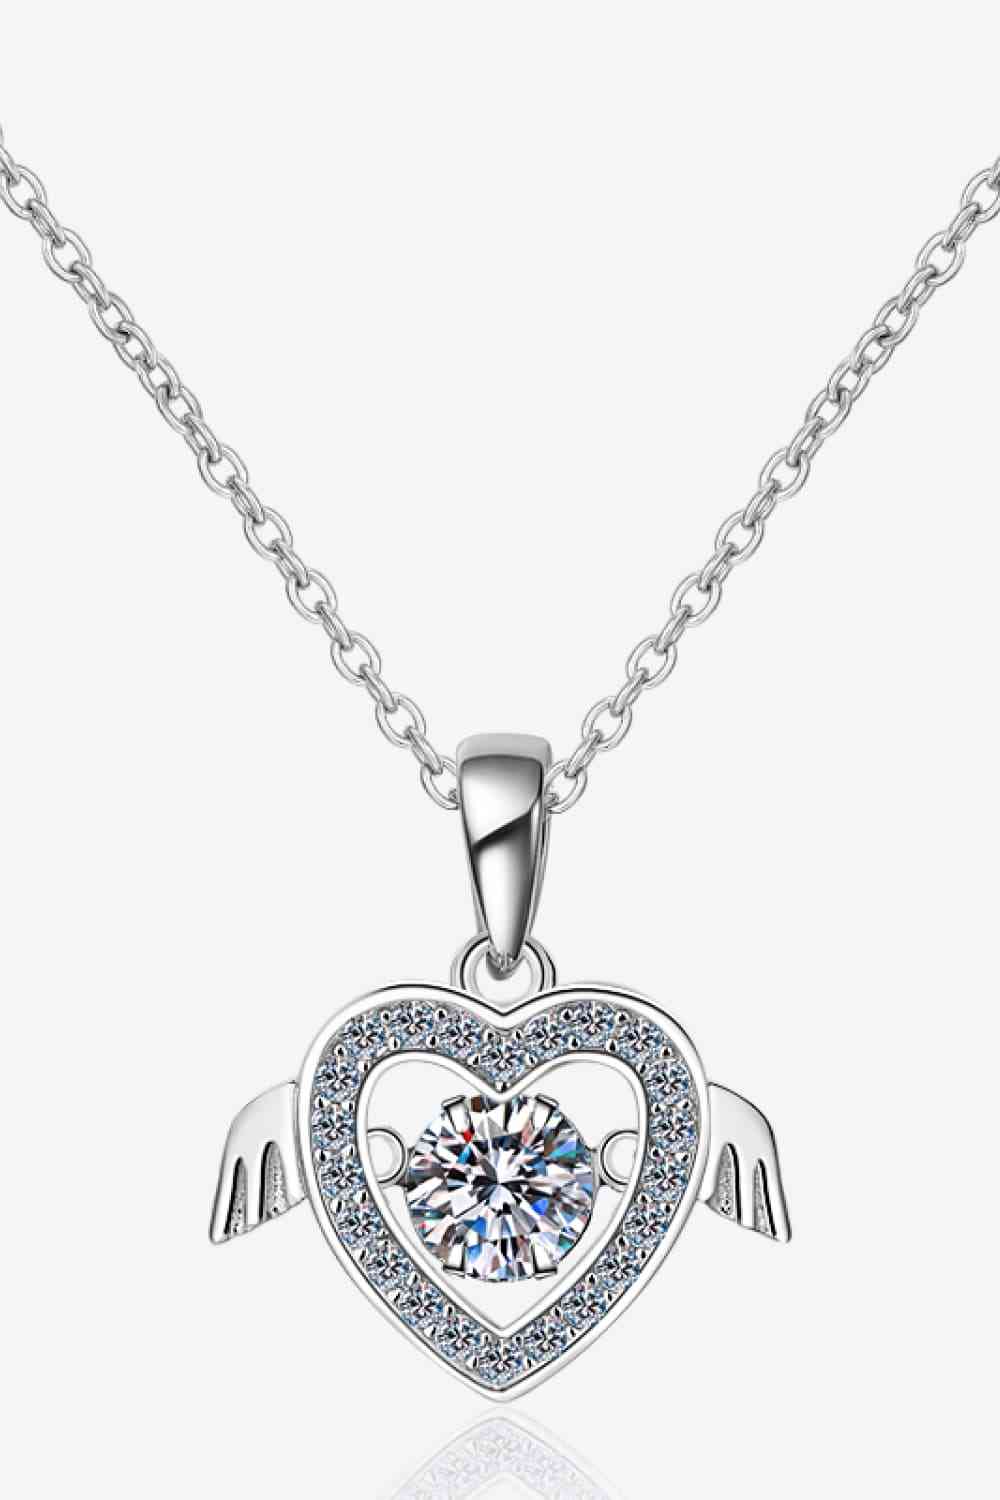 Ethereal Luminescence: 925 Moissanite Necklace